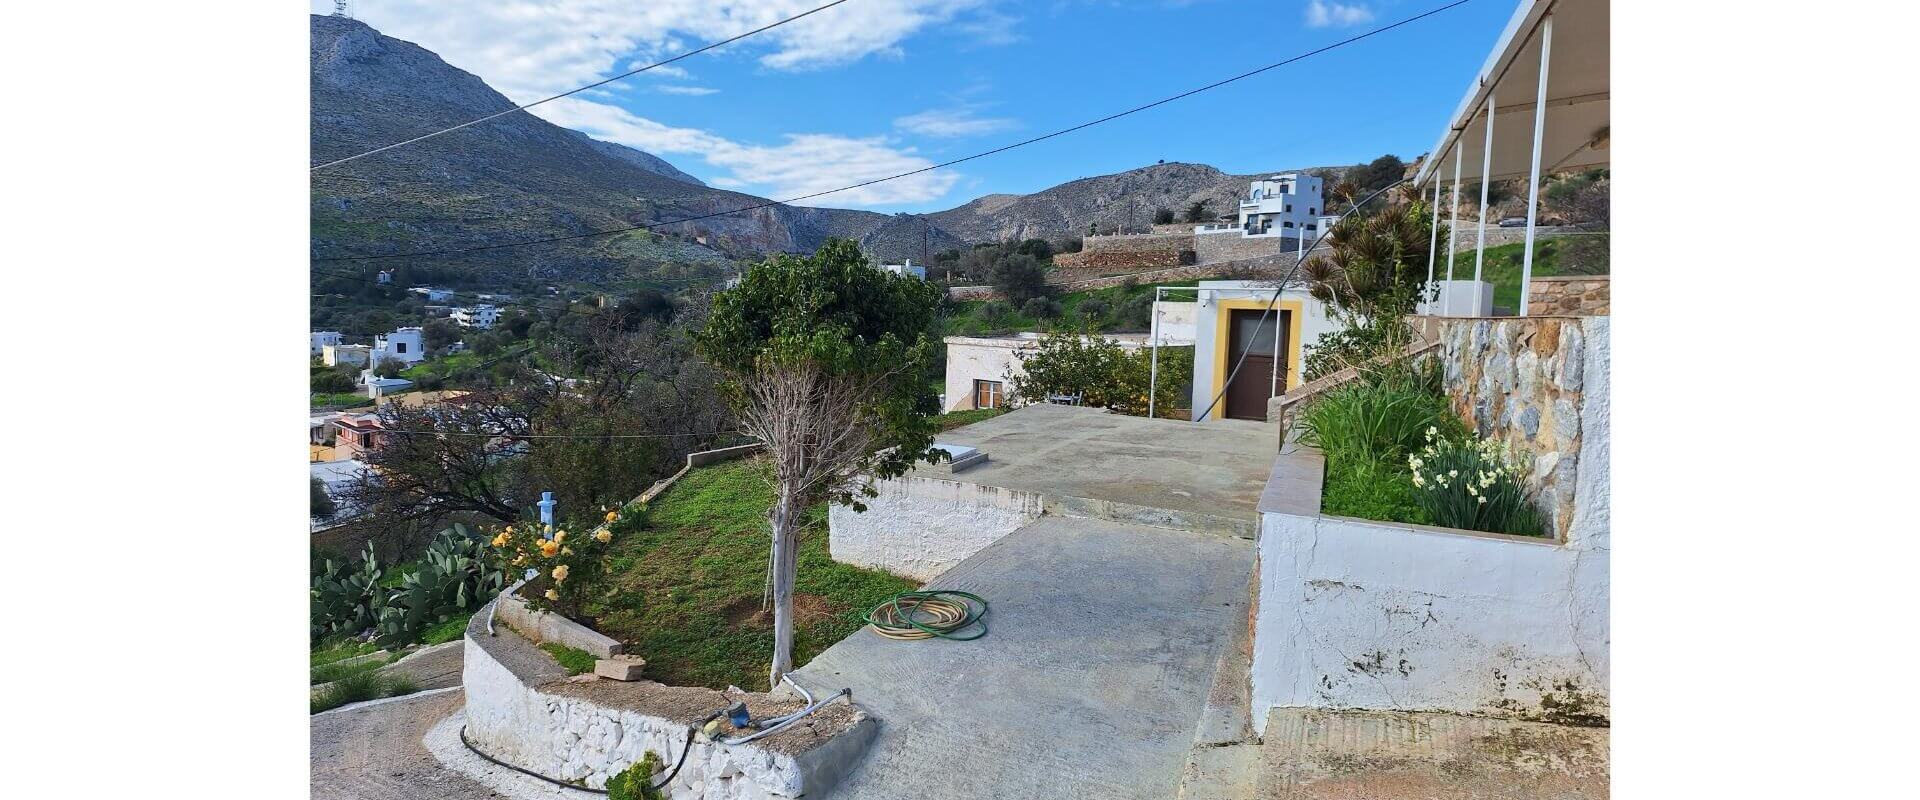 House for sale Xerocampos L 804